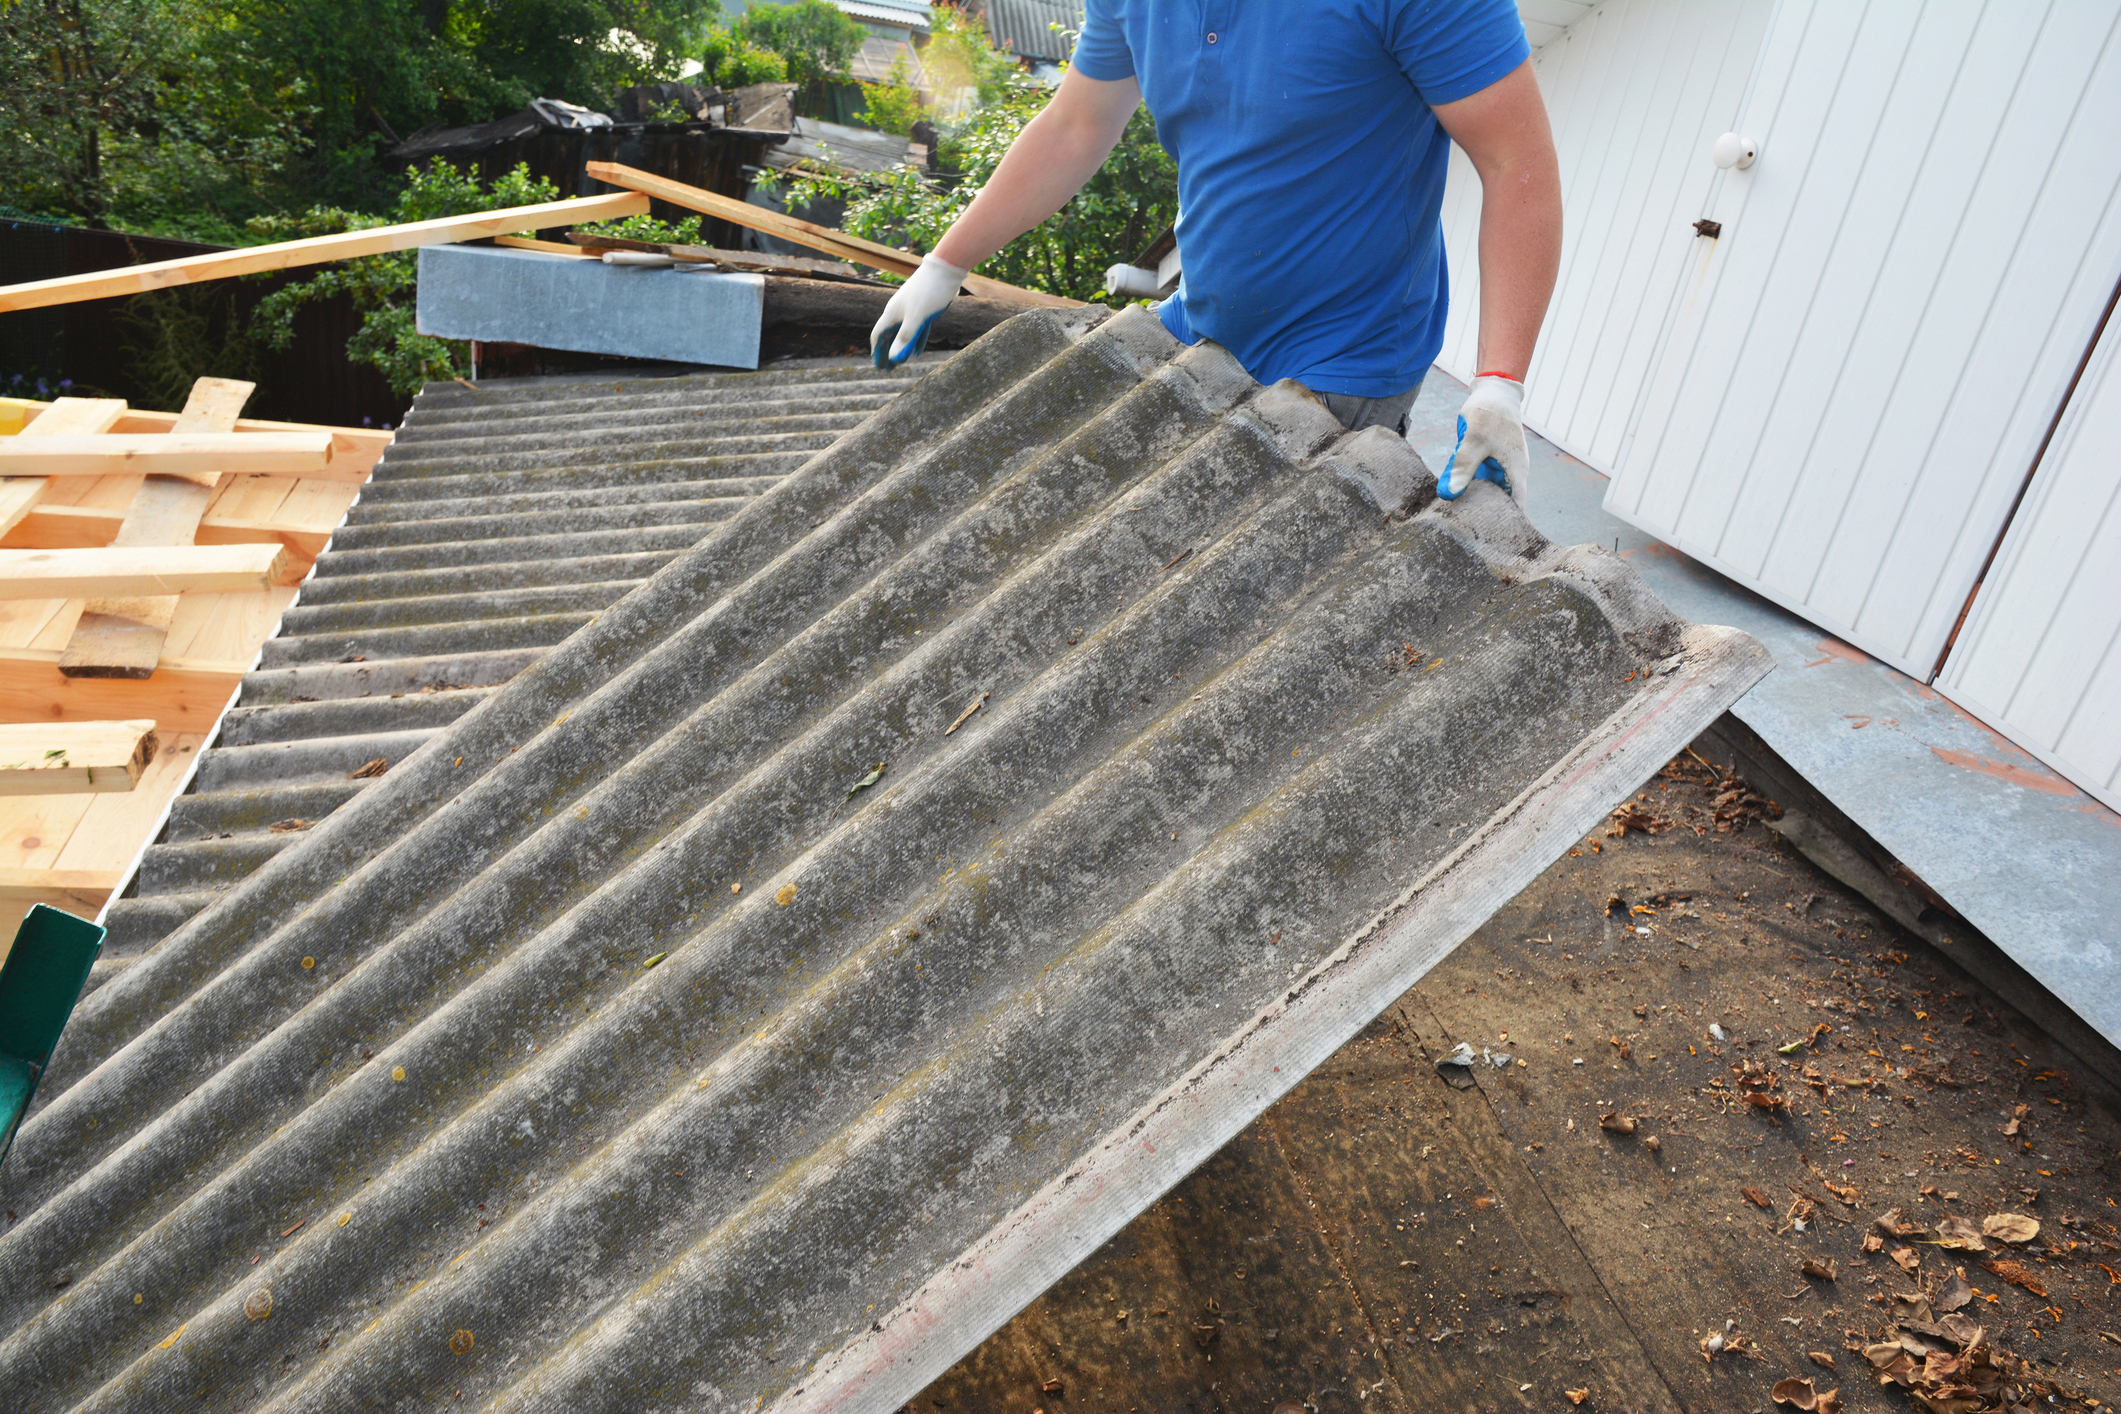 Asbestos roof removal Kent